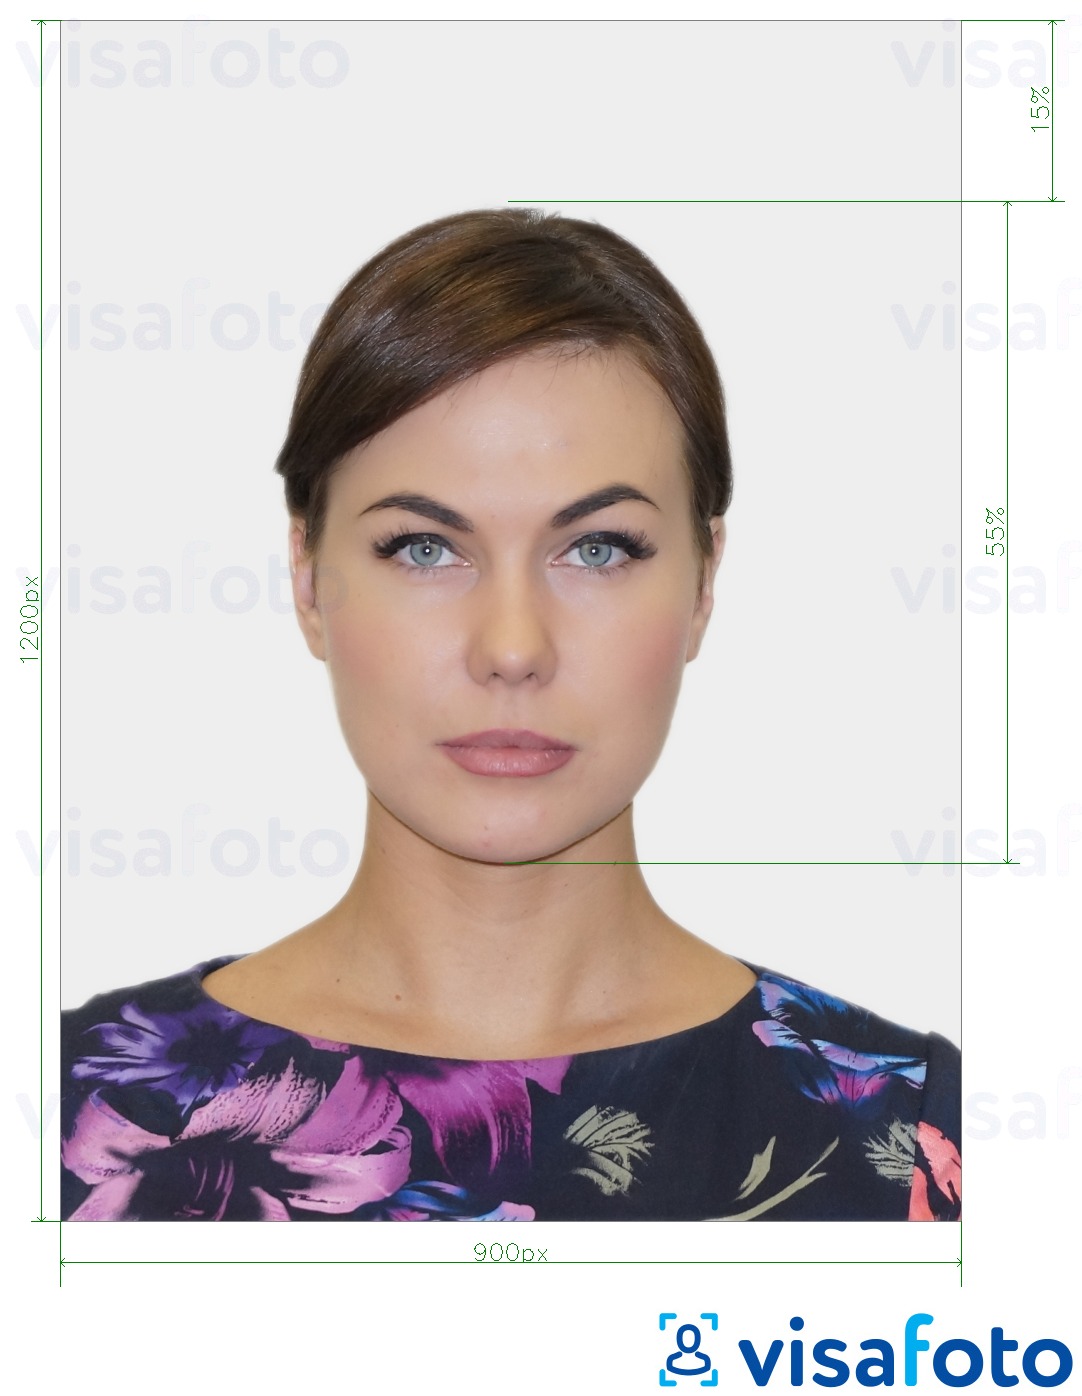 Example of photo for UK Passport online with exact size specification